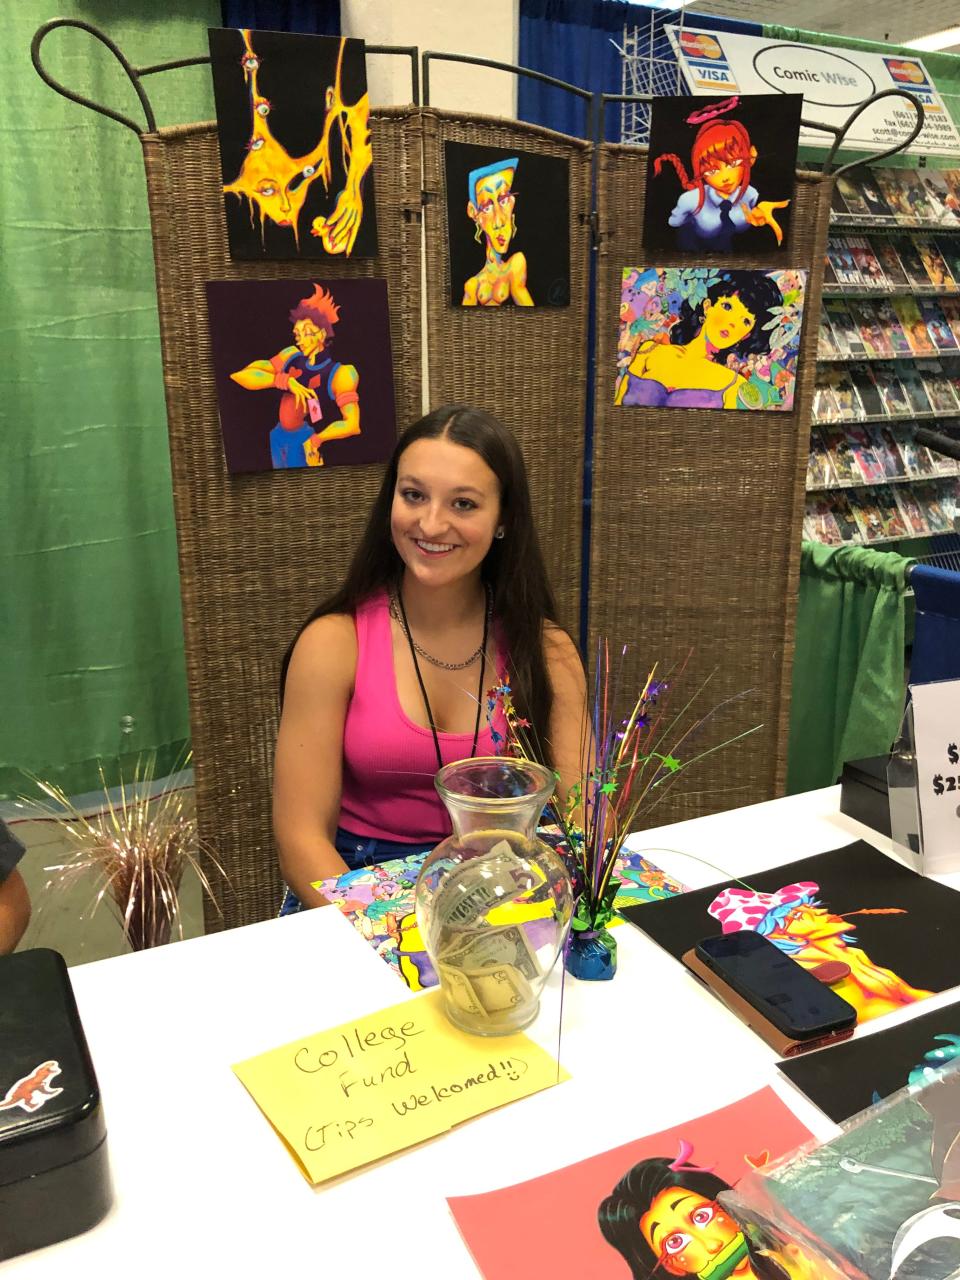 The artist at Fritz Tooth Art booth, Abigayle Stubby-Kurn, is selling her artwork for college tuition. She was one of several vendors at the 2023 AMA-CON.